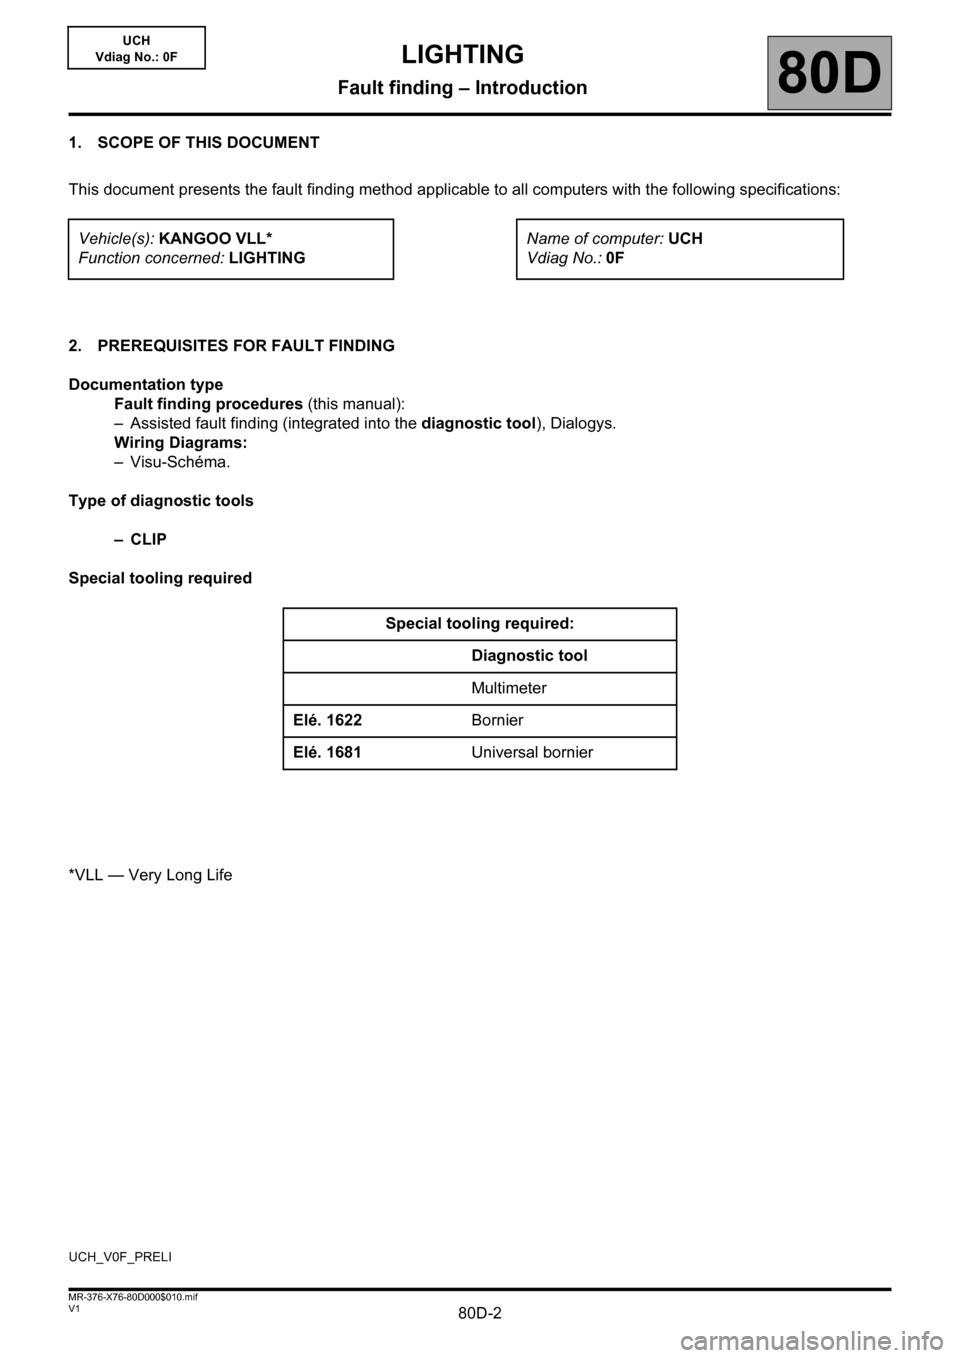 RENAULT KANGOO 2013 X61 / 2.G Lighting Workshop Manual 80D-2V1 MR-376-X76-80D000$010.mif
80D
UCH
Vdiag No.: 0F
1. SCOPE OF THIS DOCUMENT
This document presents the fault finding method applicable to all computers with the following specifications:
2. PRER